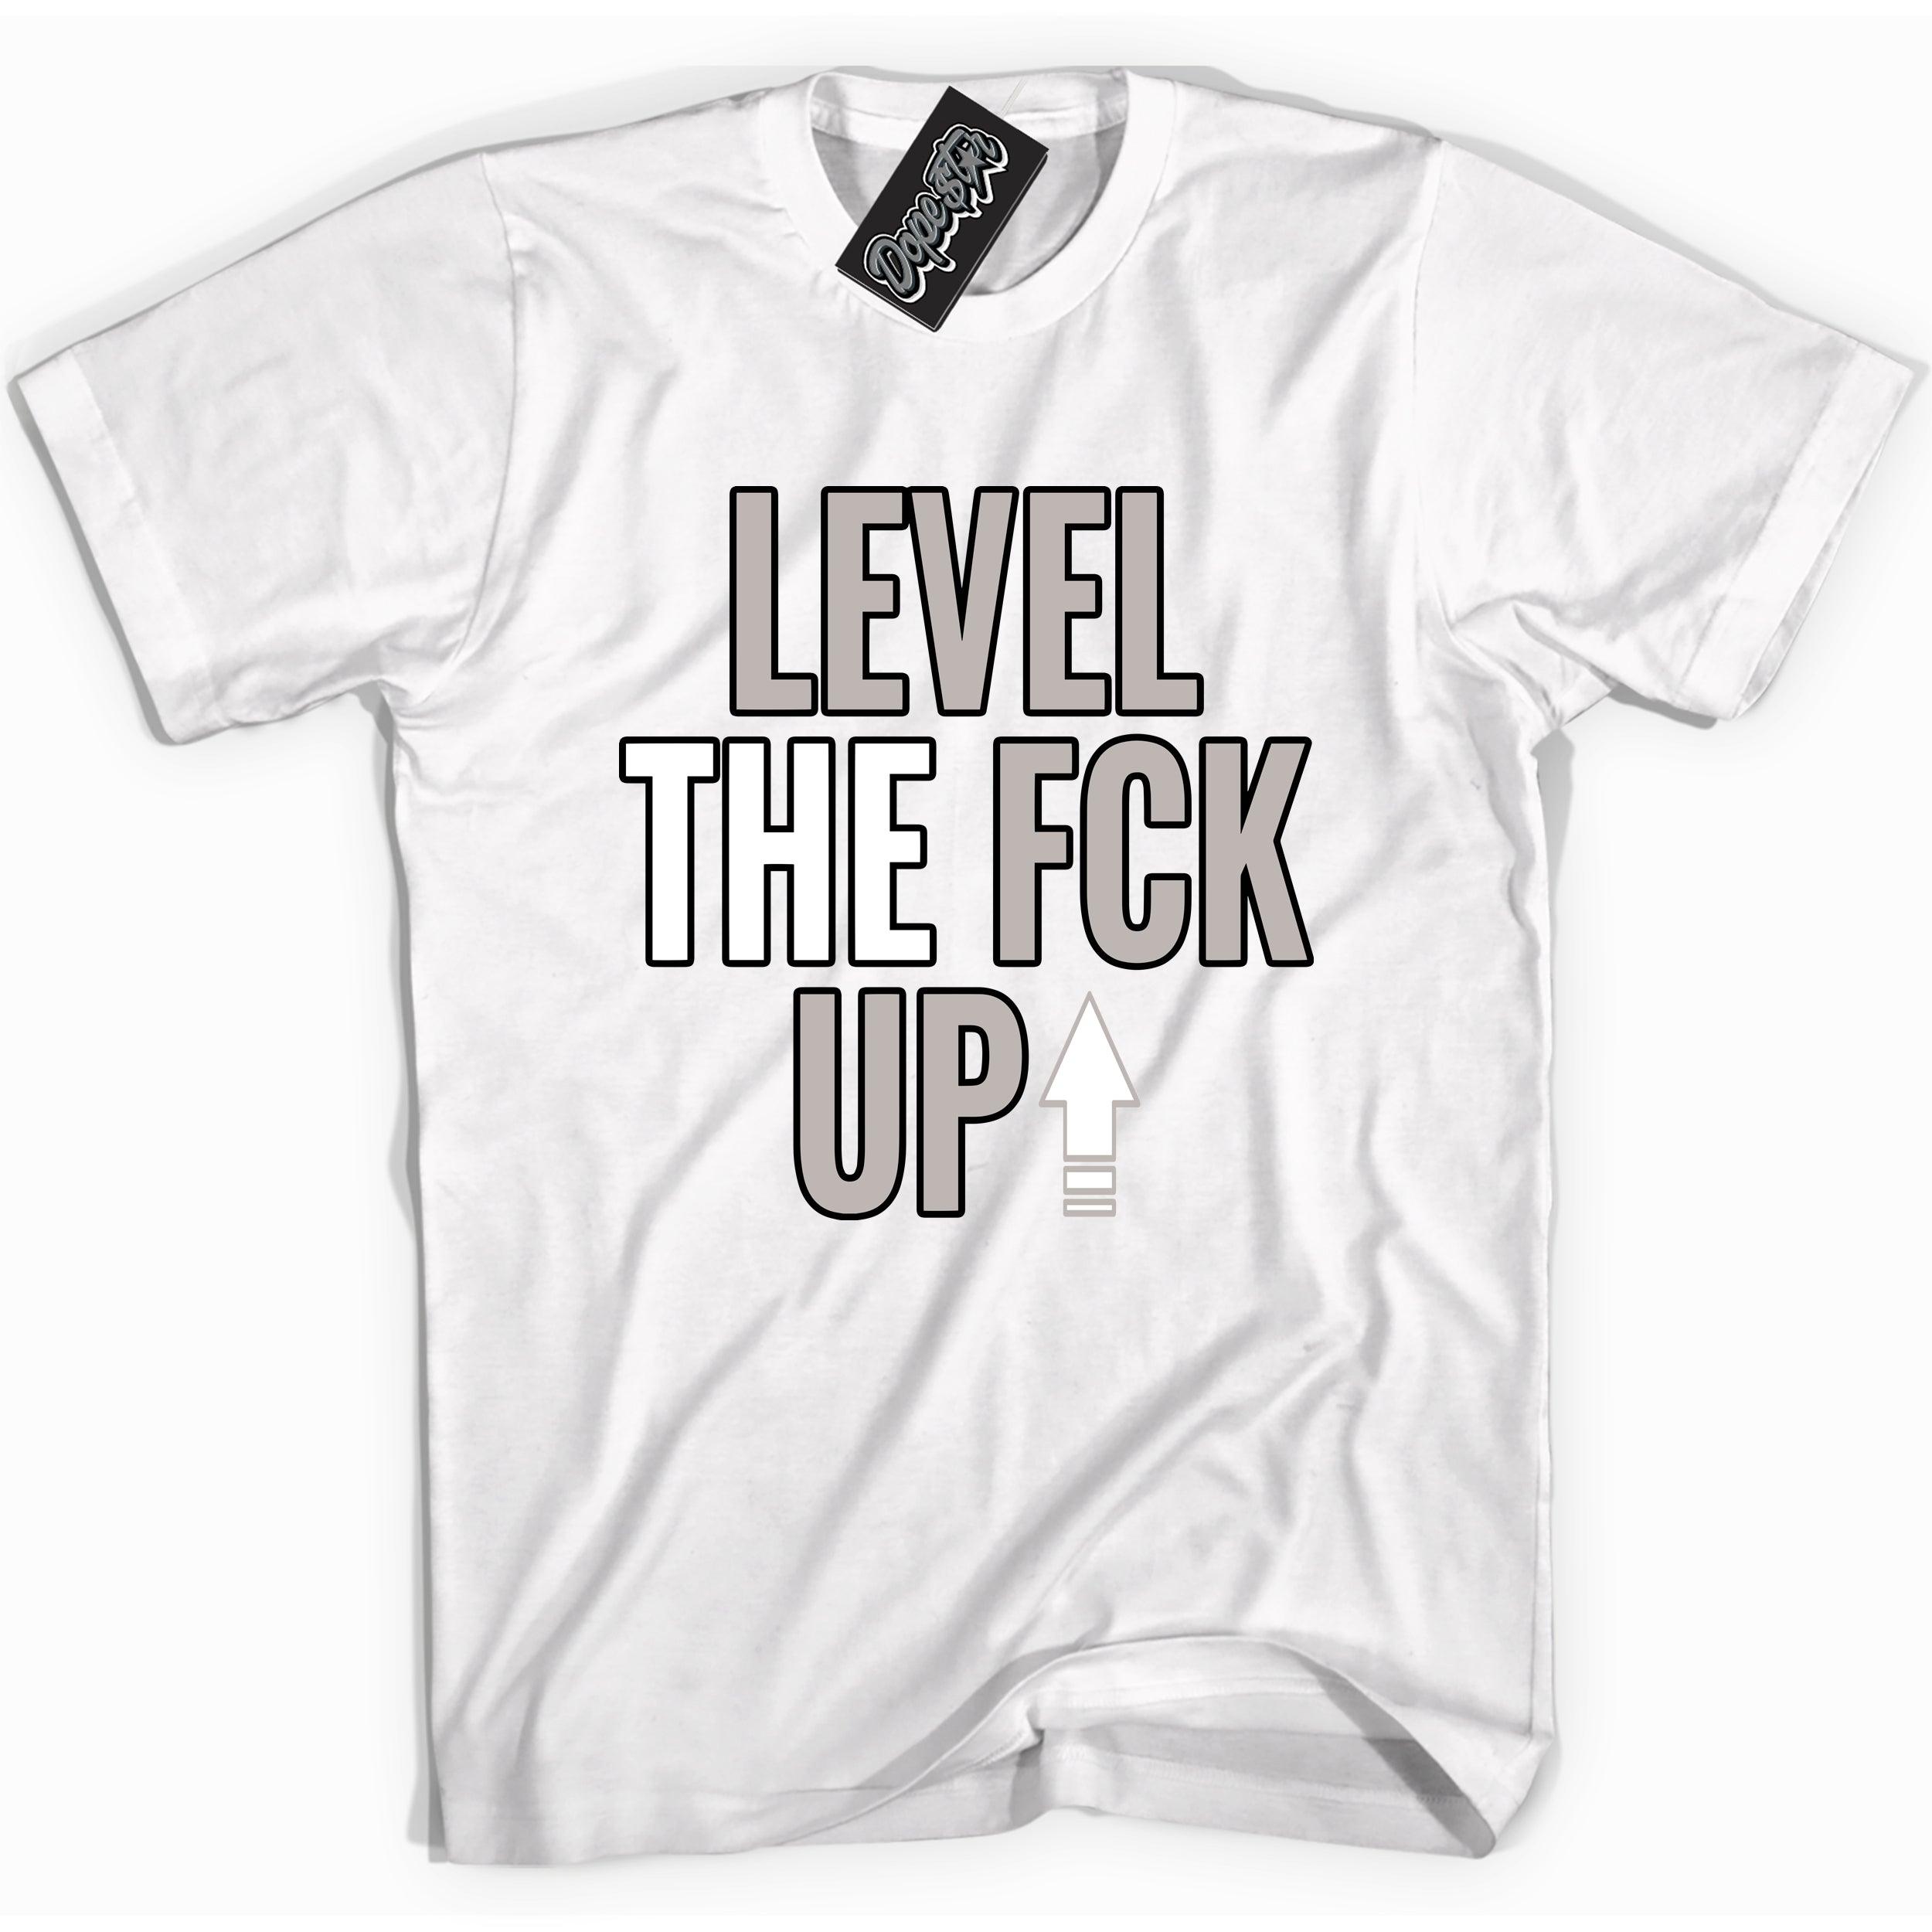 Cool White Shirt With Level Up design That Perfectly Matches AIR JORDAN 4 RETRO MILITARY BLACK Sneakers.